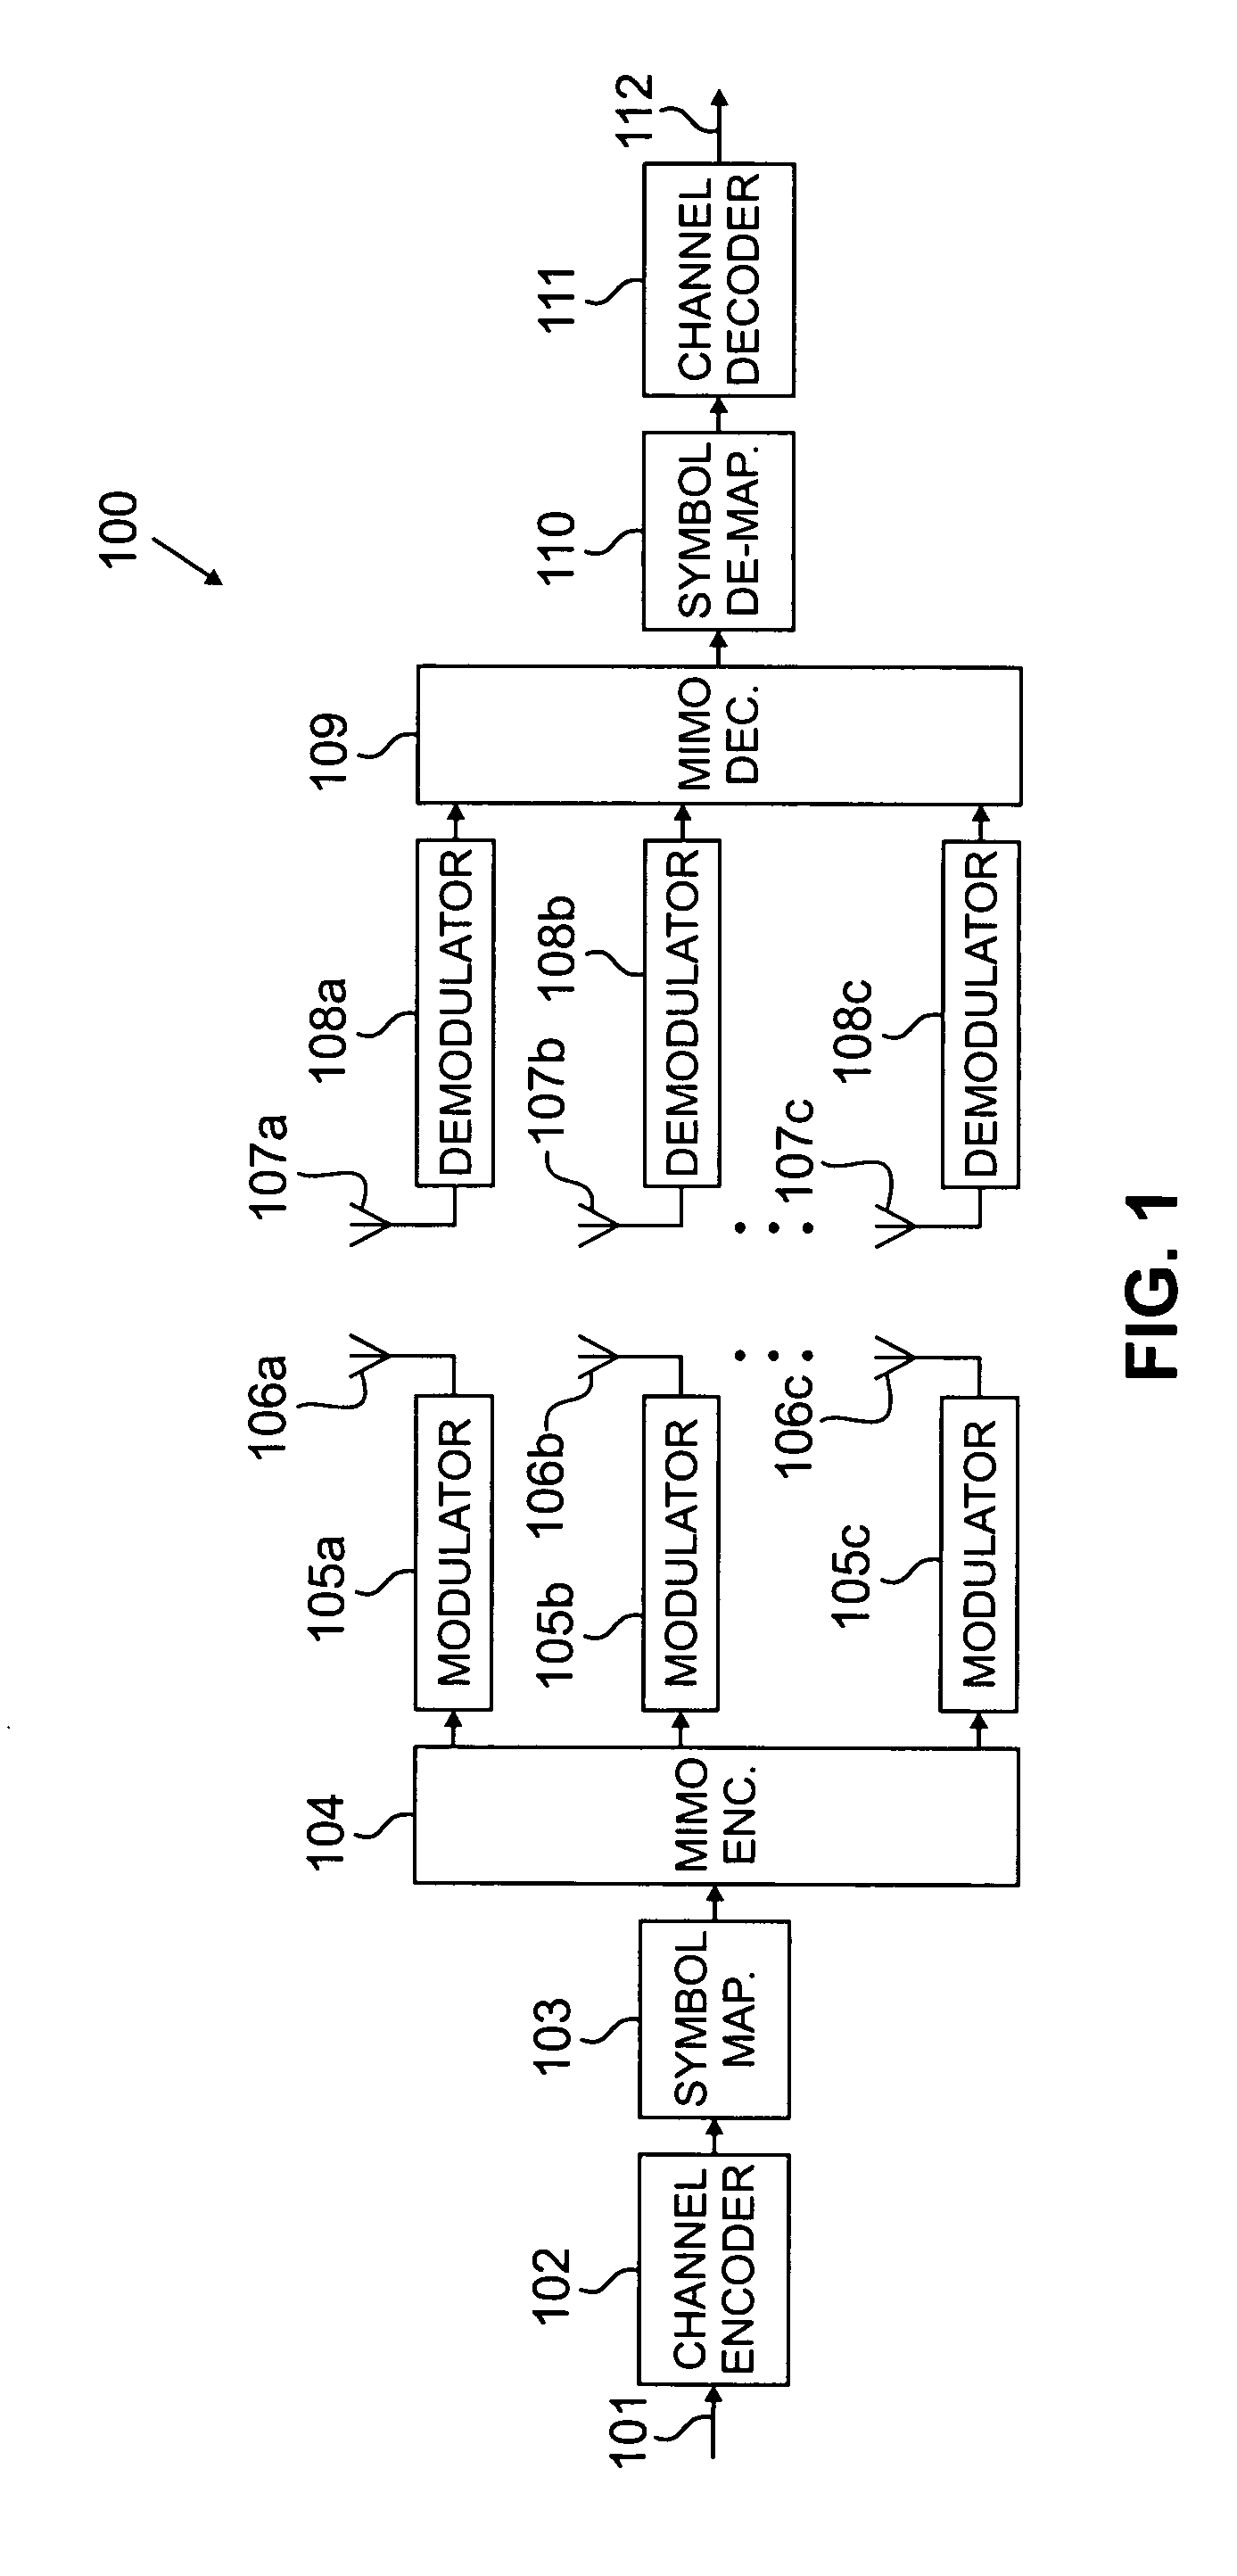 MIMO receiver with pooled adaptive digital filtering